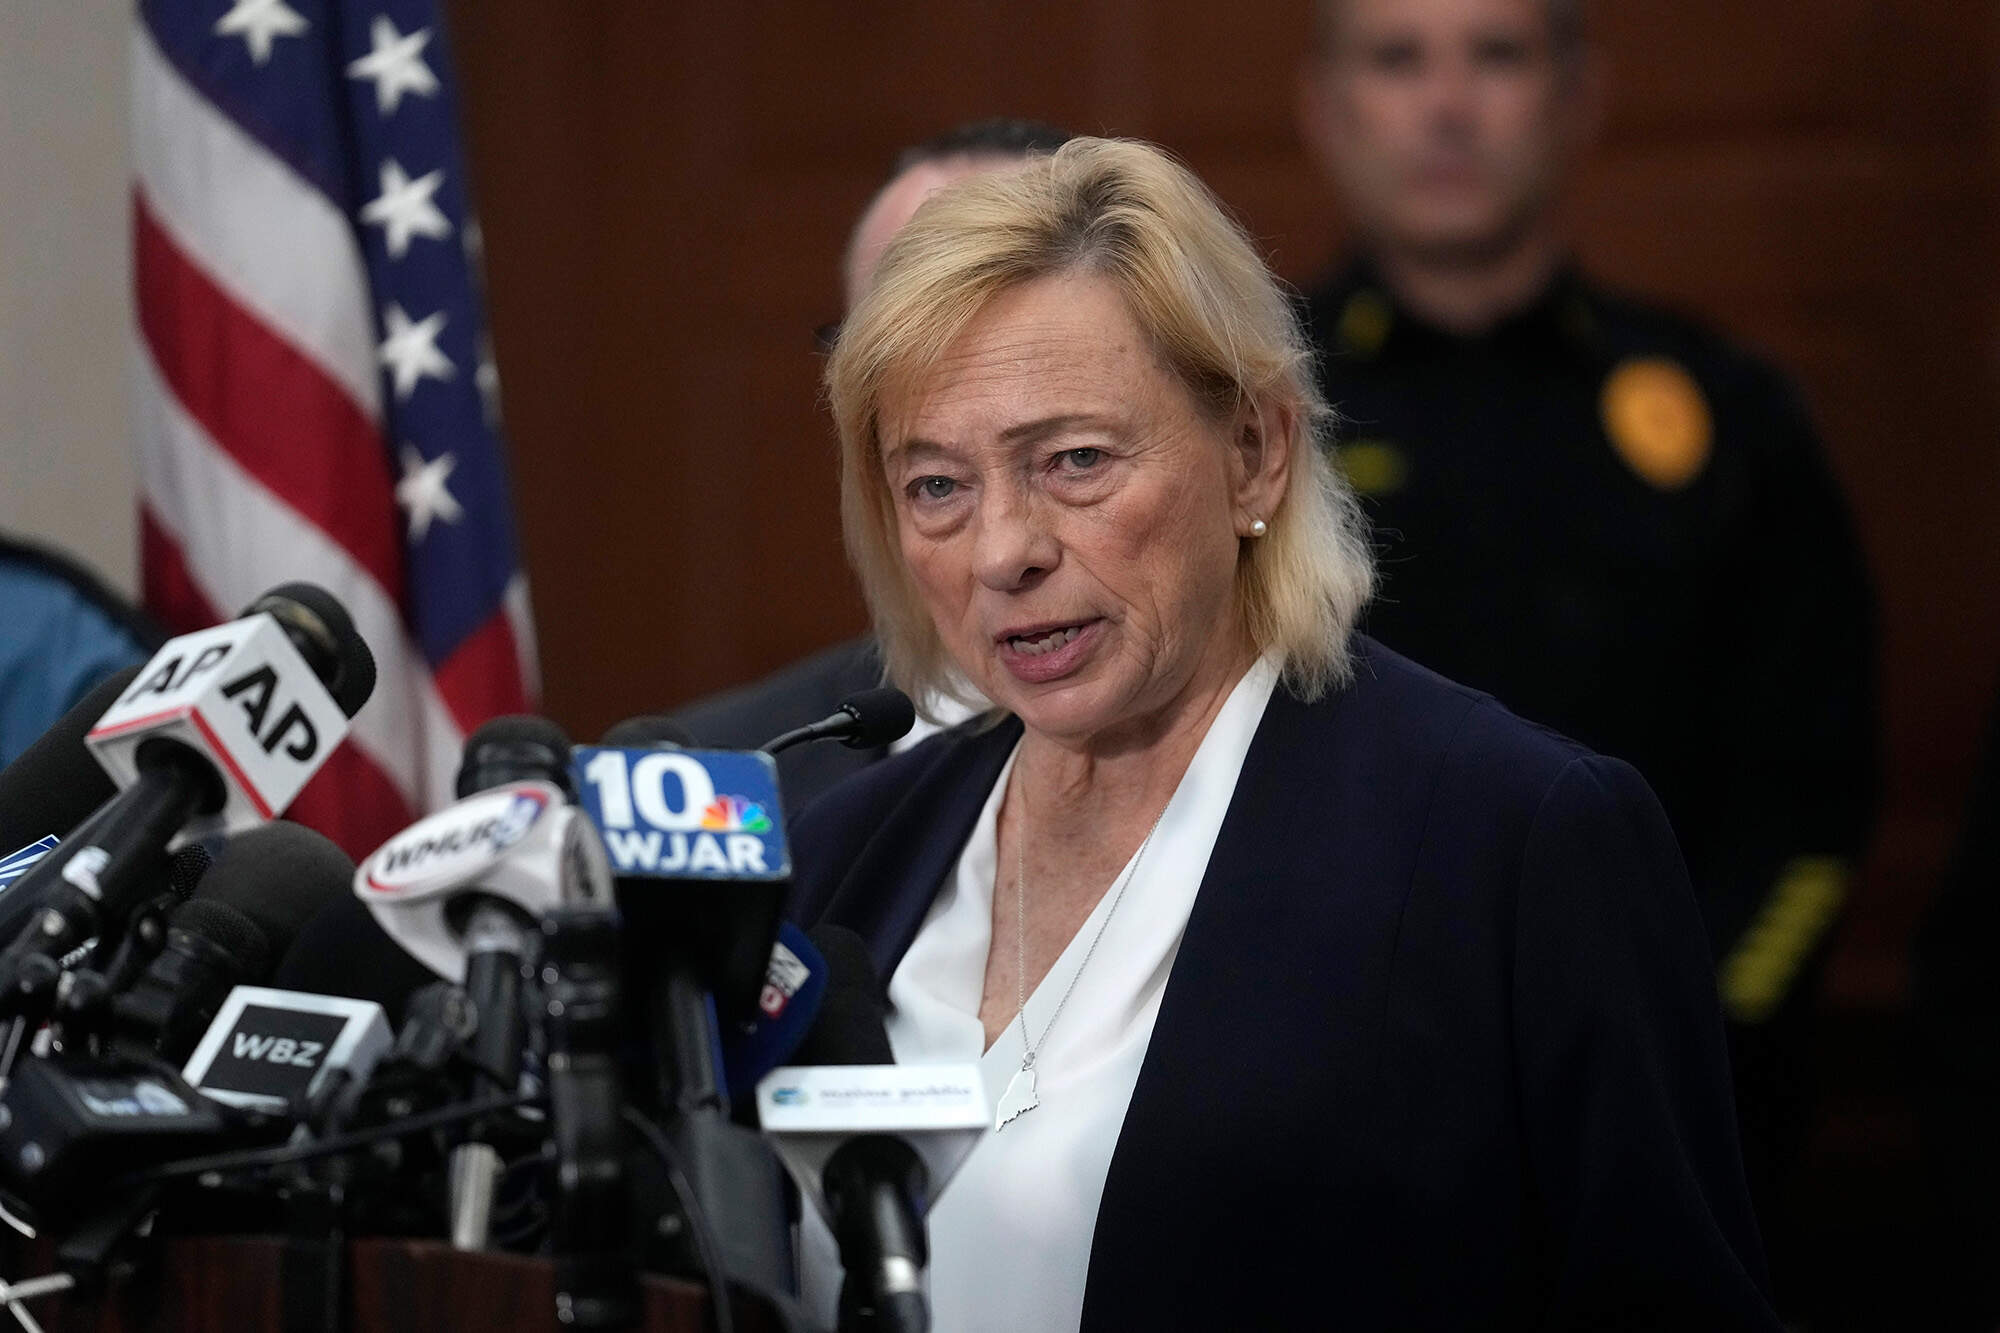 Maine Gov. Janet Mills speaks to reporters on Thursday at Lewiston City Hall. Residents have been ordered to shelter in place as police continue to search for the suspect of Wednesday's mass shootings. (Steven Senne/AP)